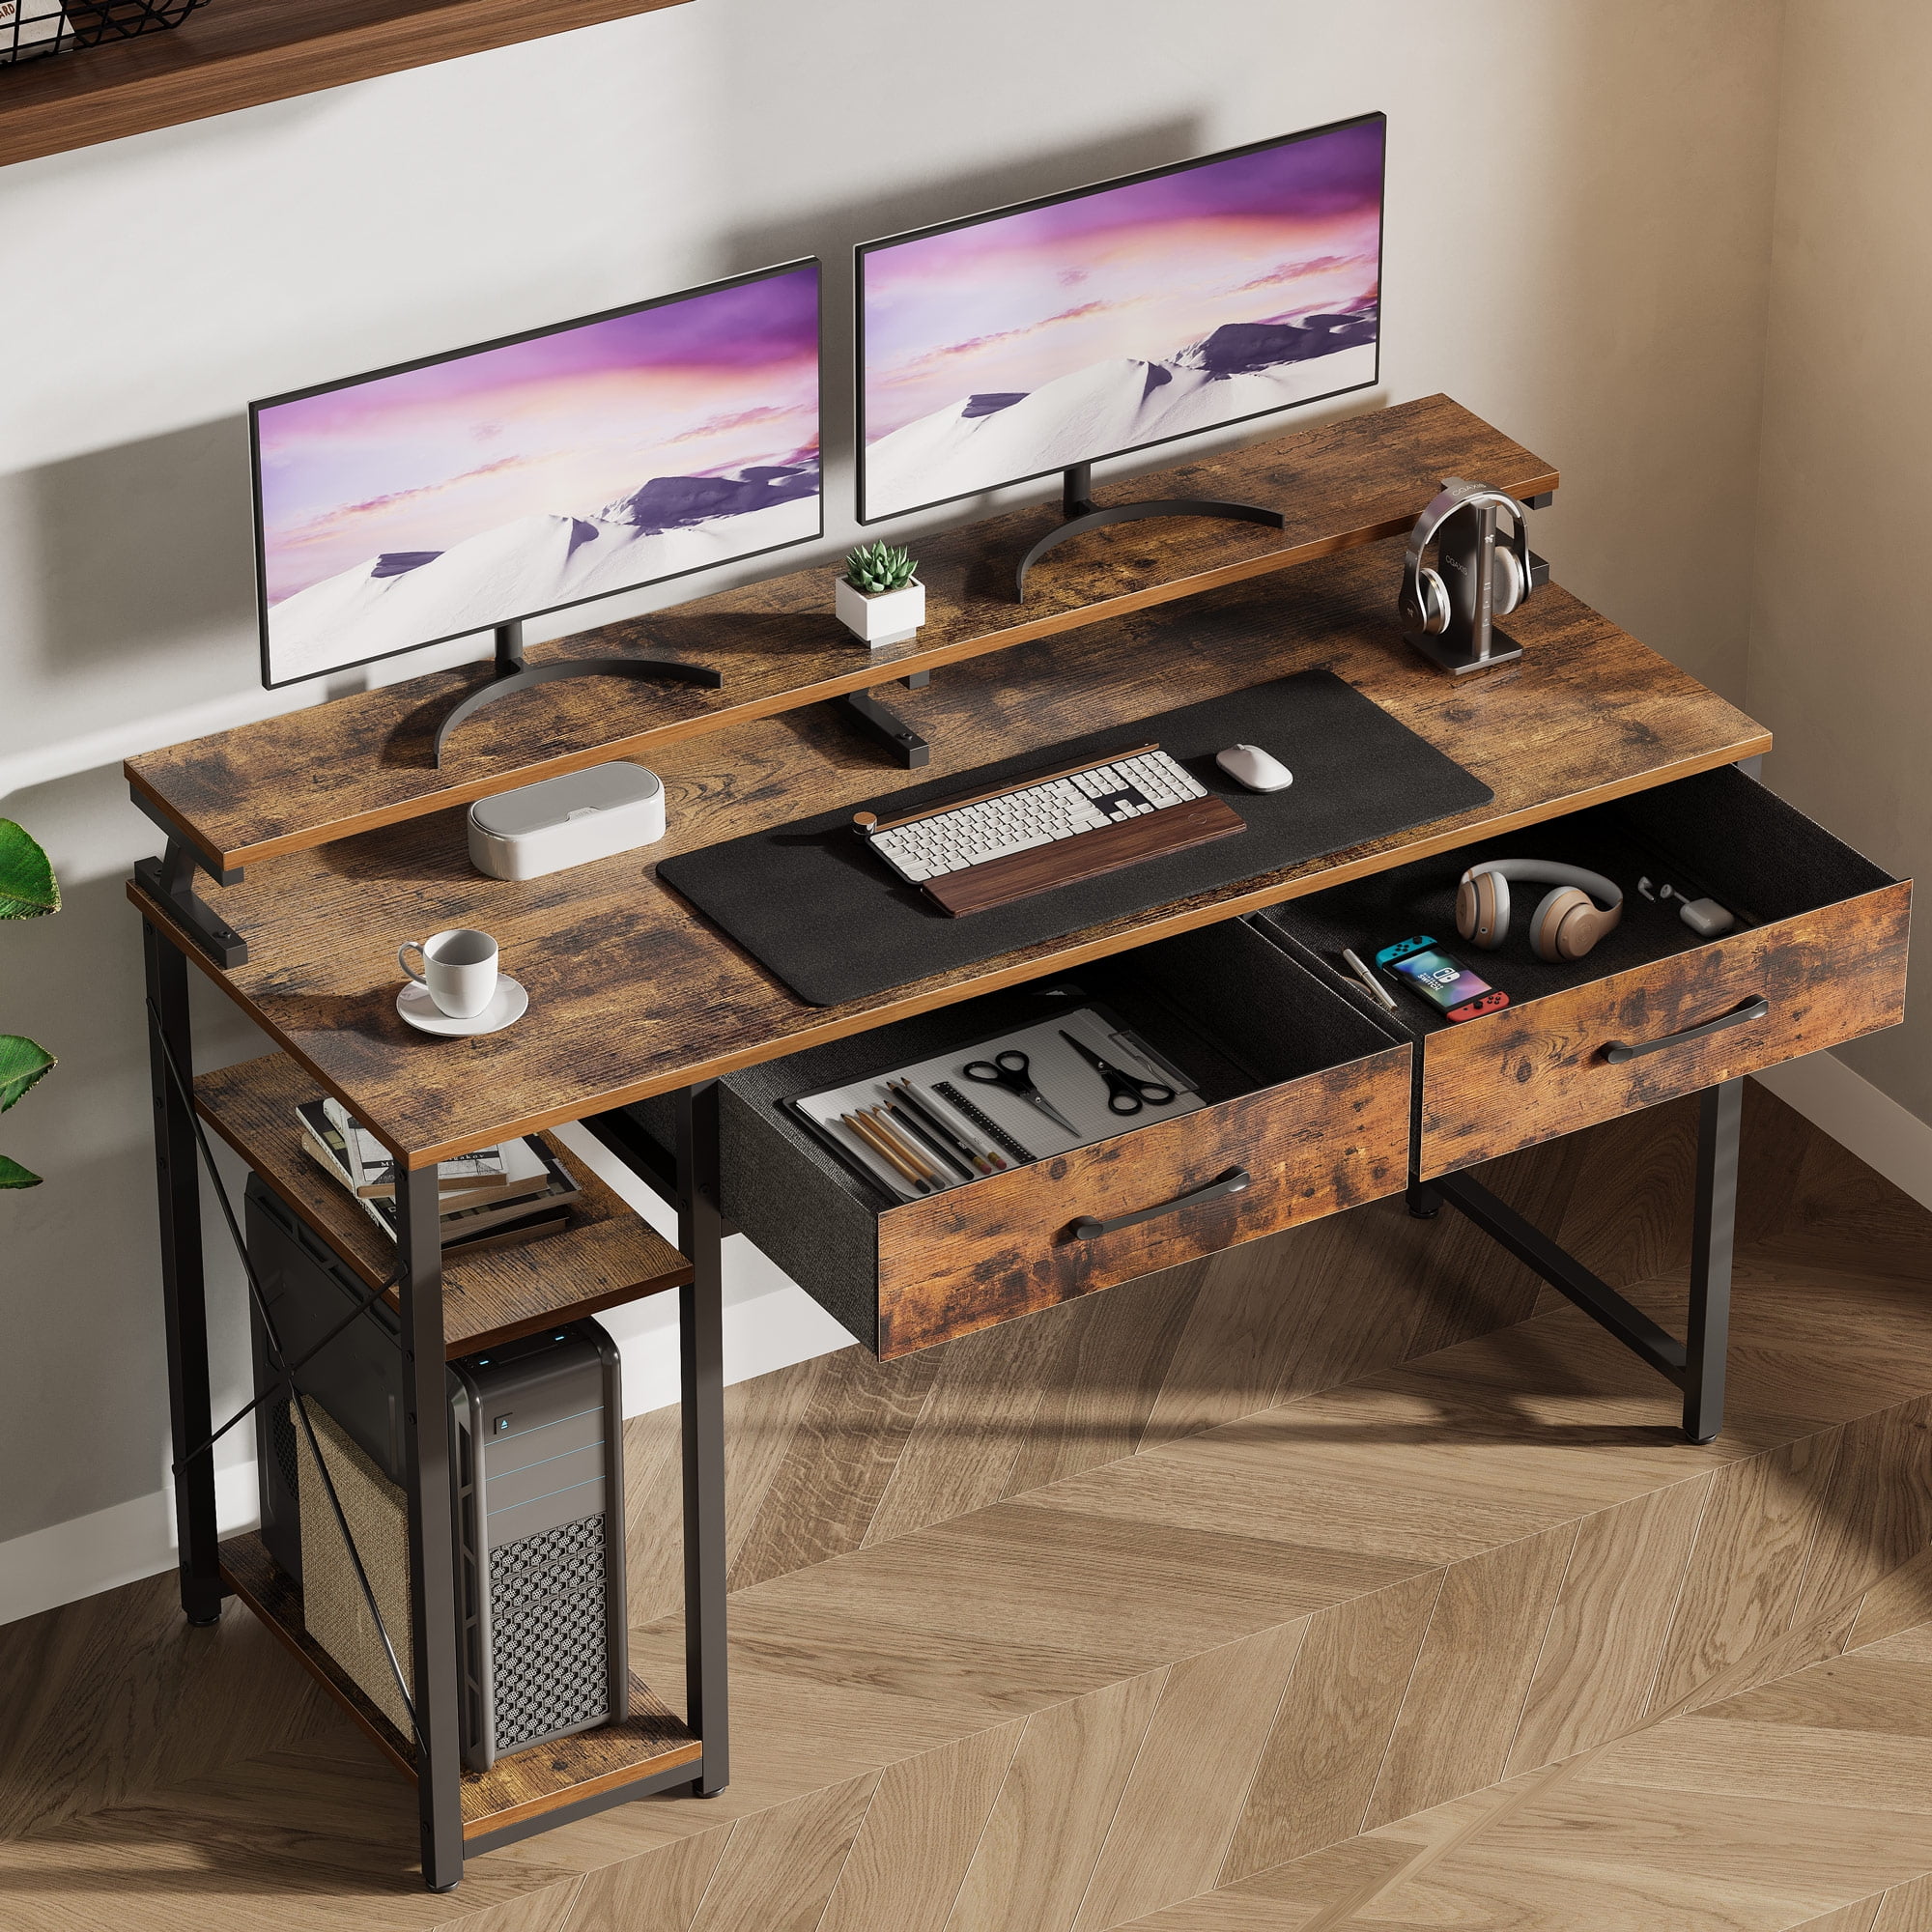 Computer Desk with Drawers and Storage Shelves, 48 inch Home